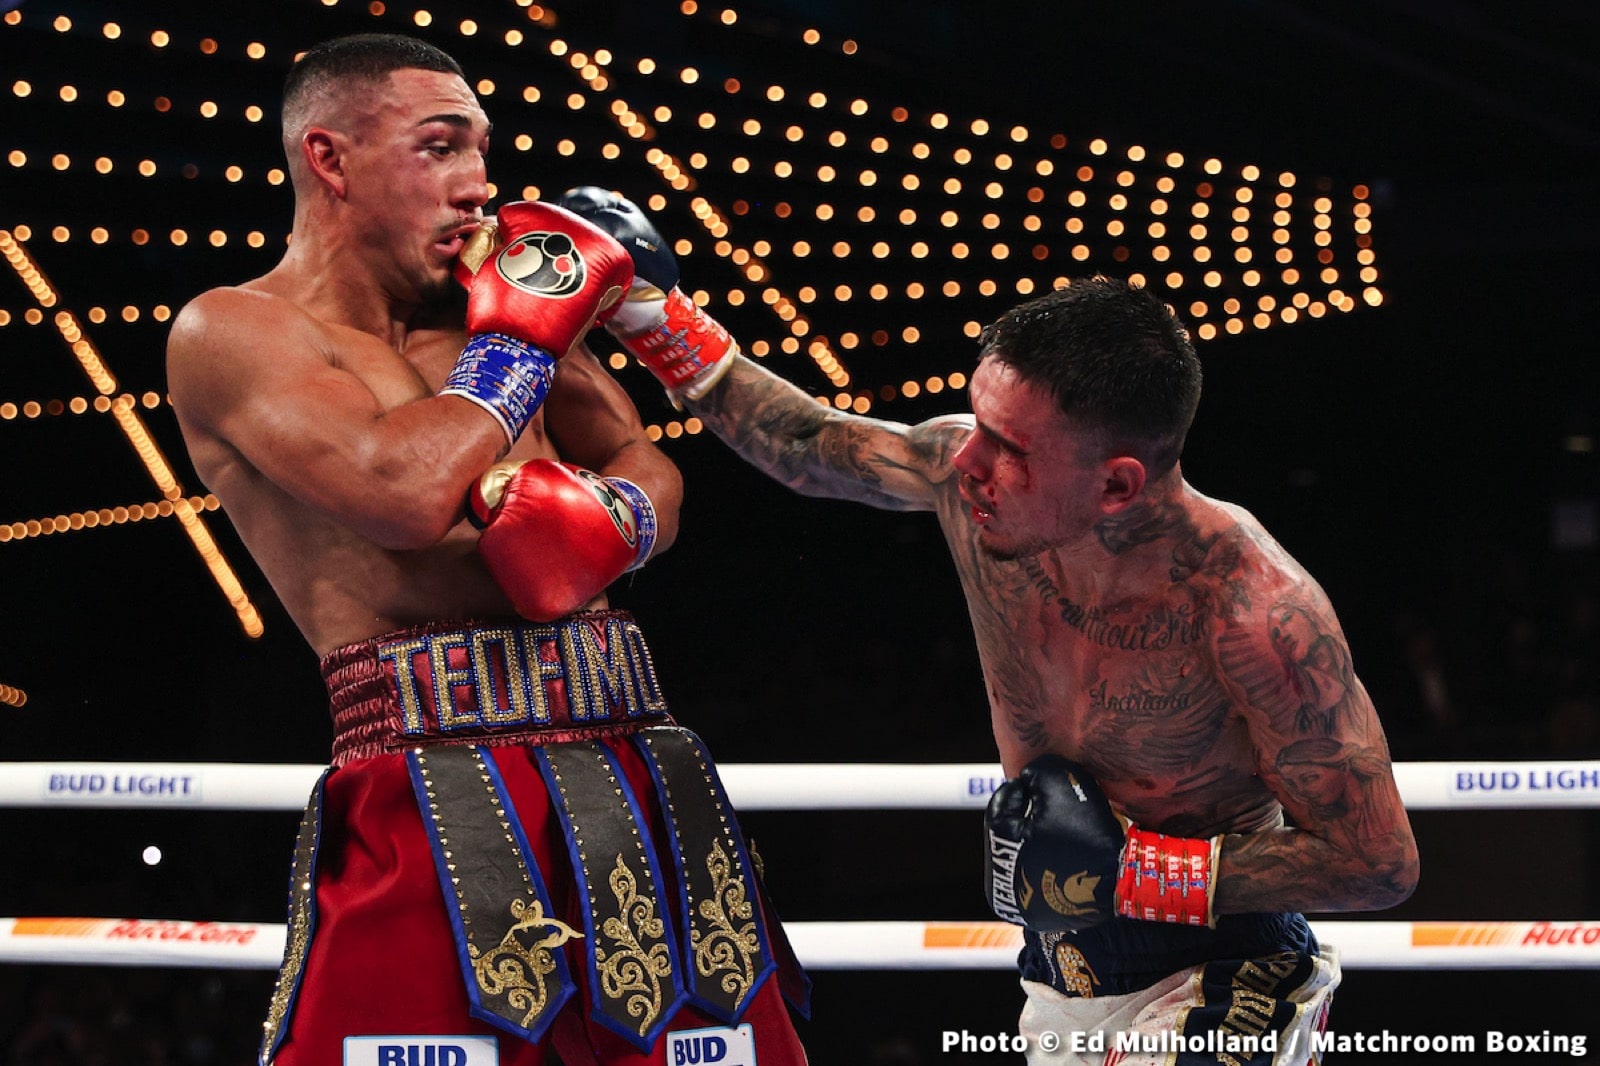 Image: Teofimo Sr. says "No rematch" with Kambosos, Teo moving to 140 for Josh Taylor fight